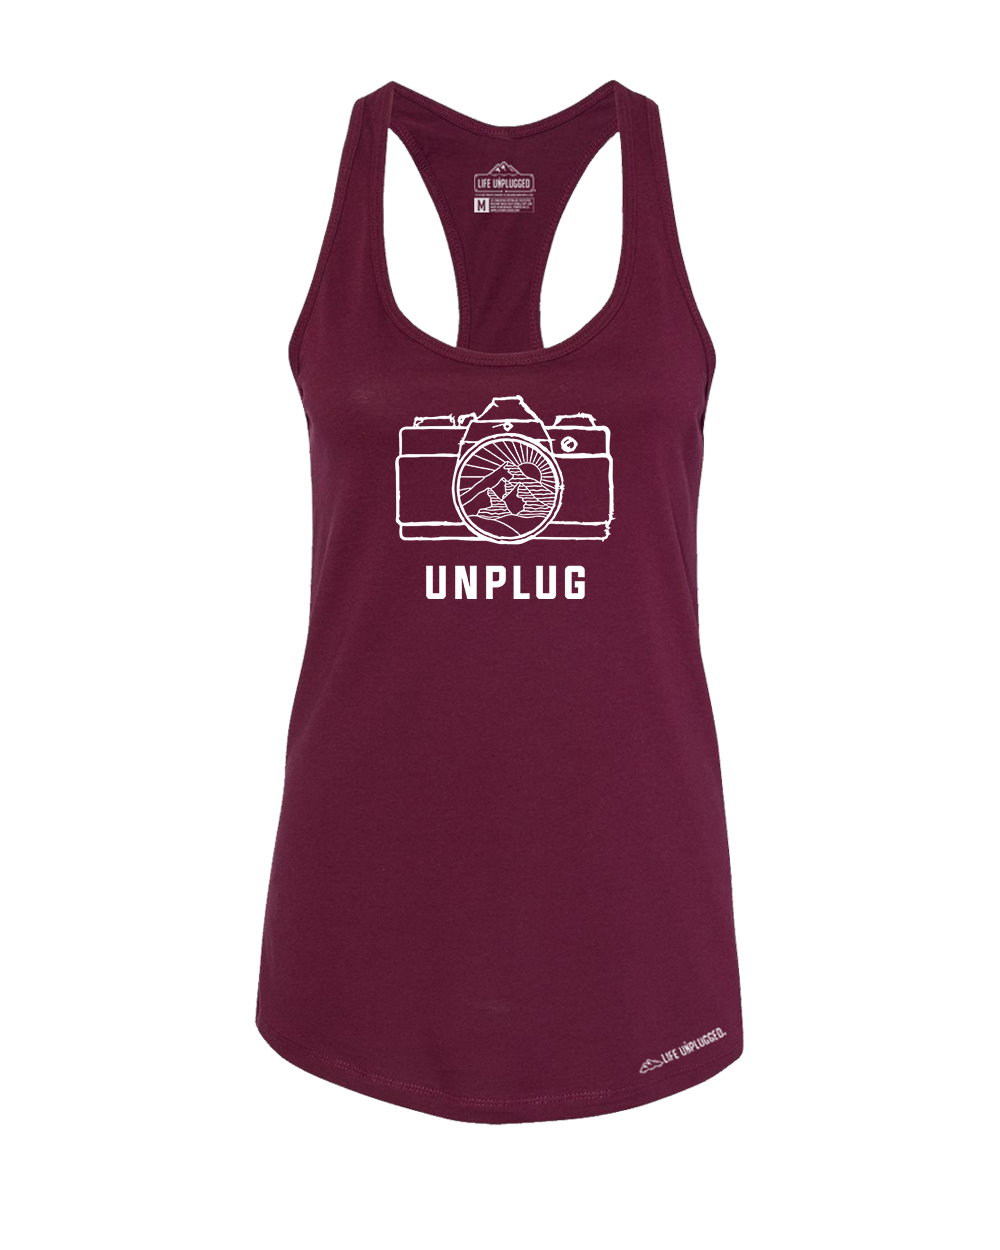 Camera Mountain Lens Premium Women's Relaxed Fit Racerback Tank Top - Life Unplugged